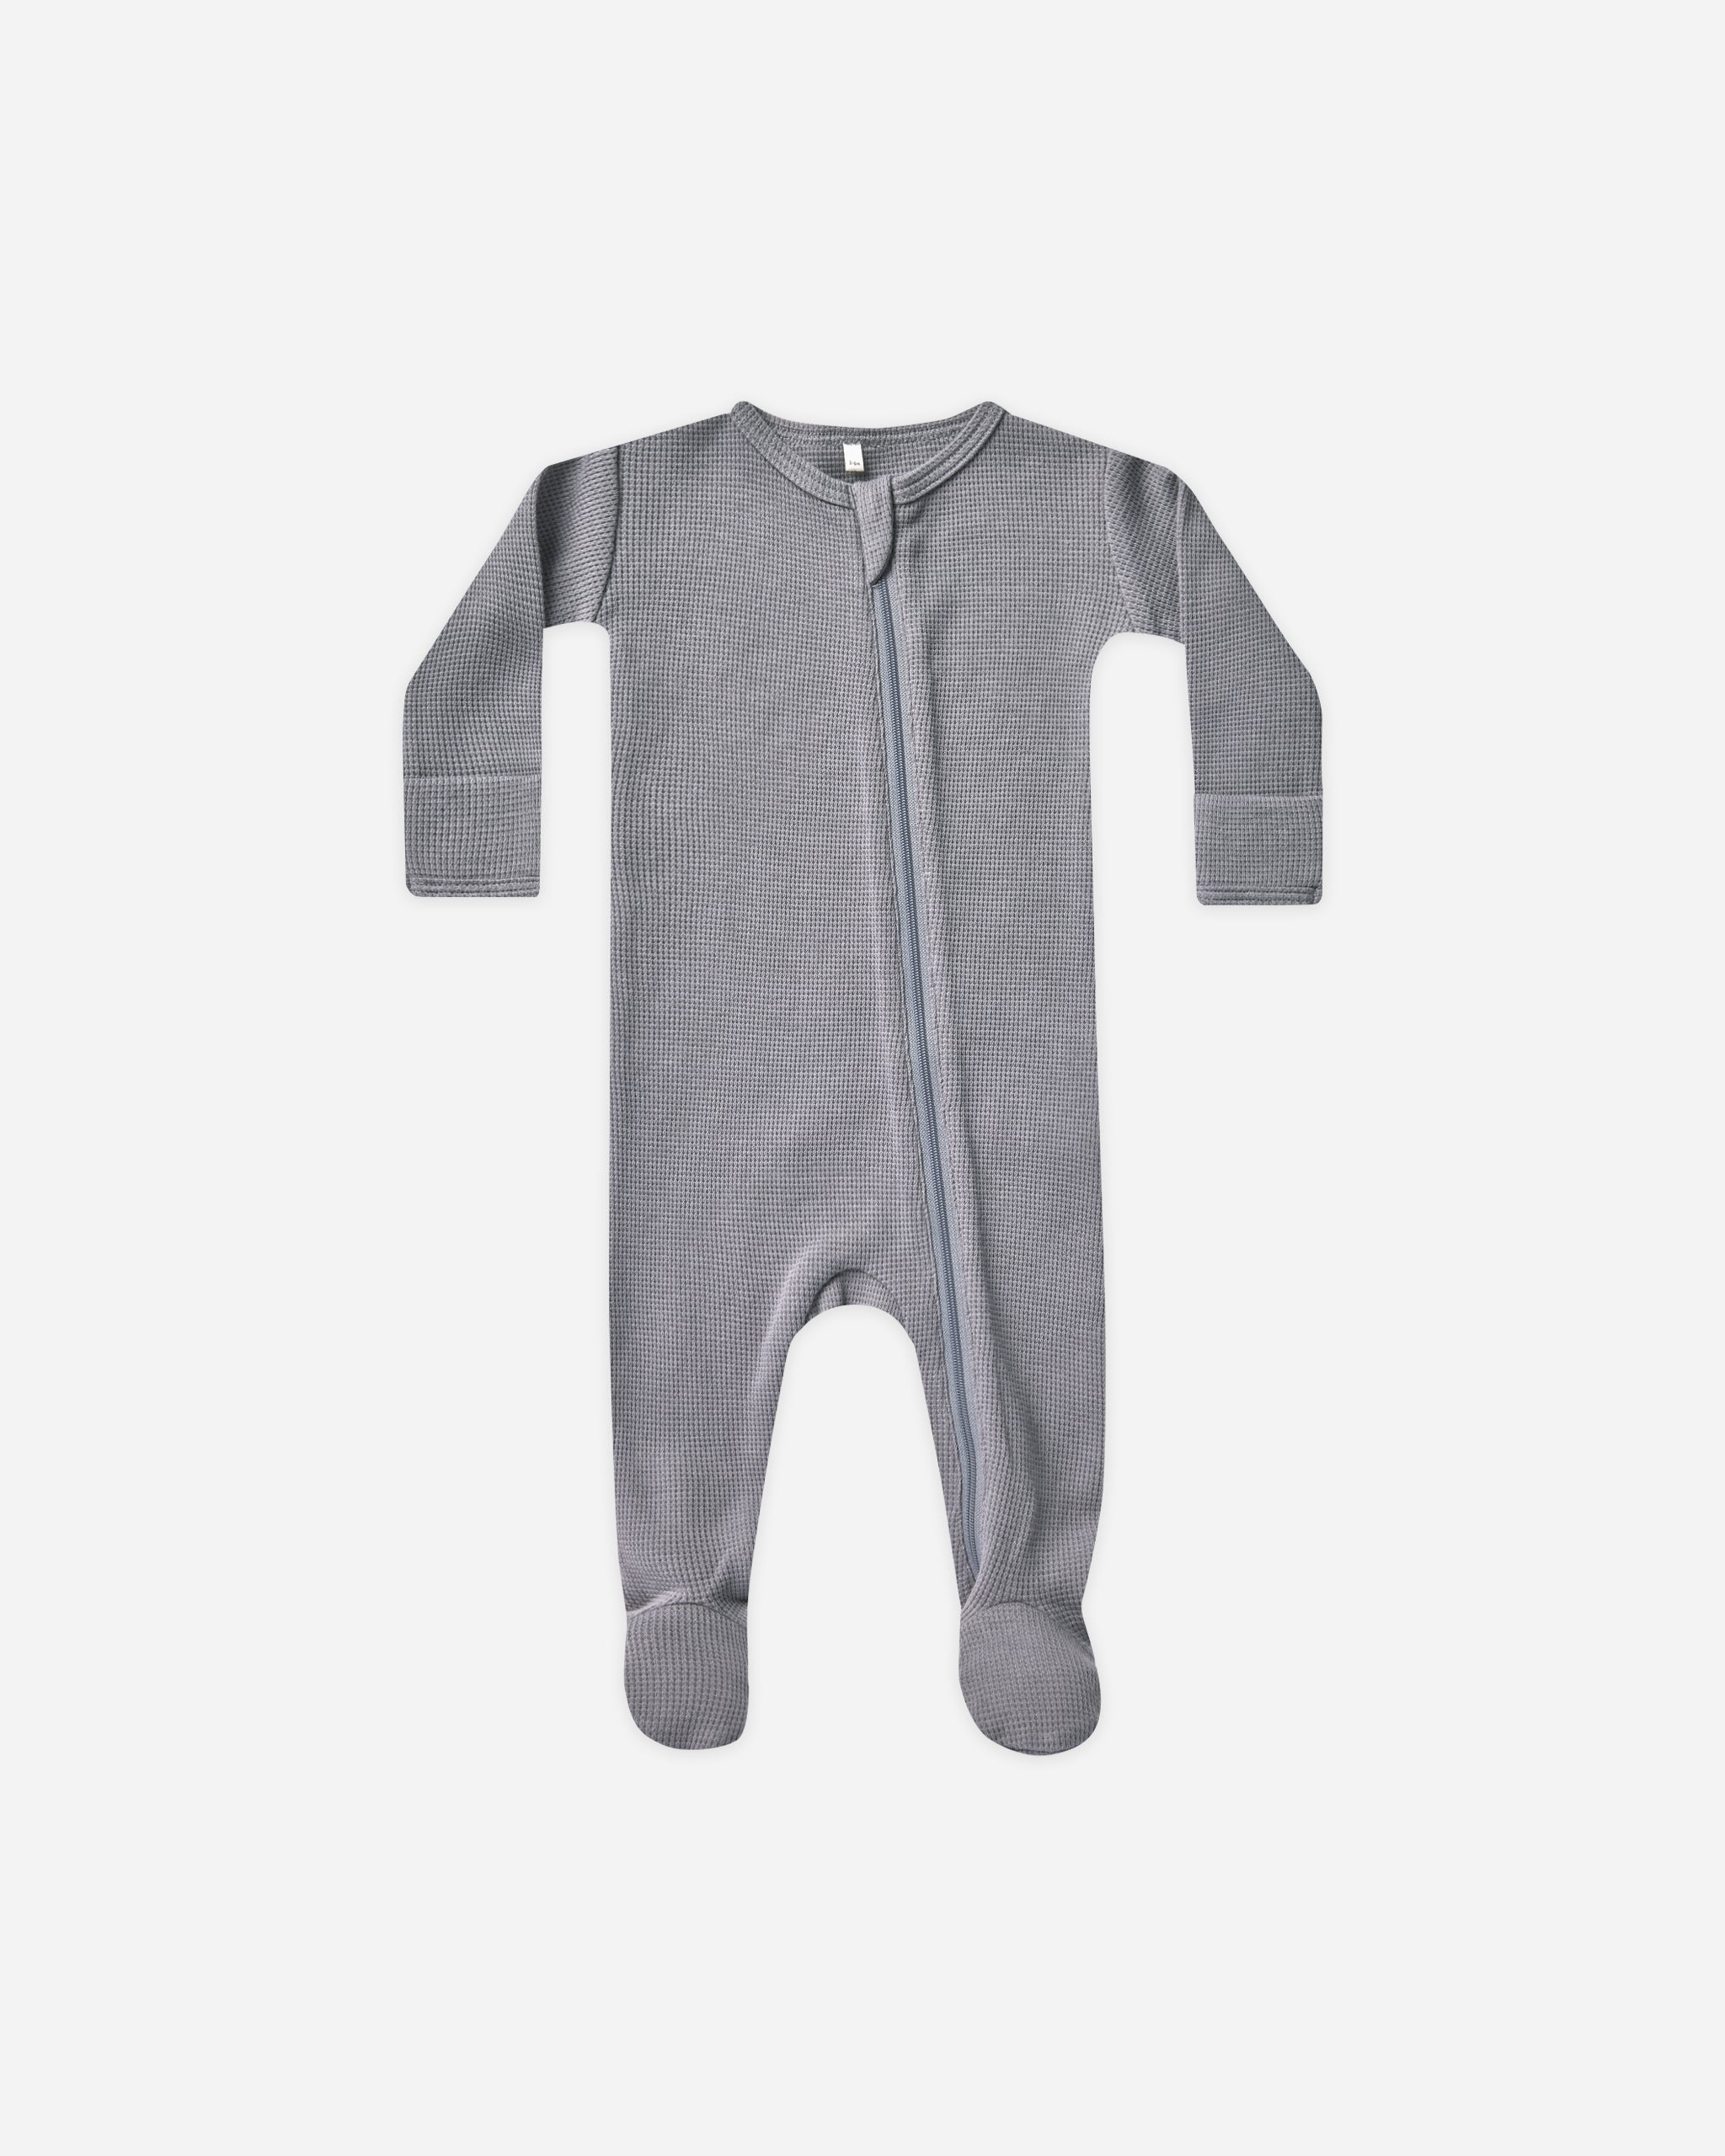 Waffle Zip Footie || Lagoon - Rylee + Cru | Kids Clothes | Trendy Baby Clothes | Modern Infant Outfits |